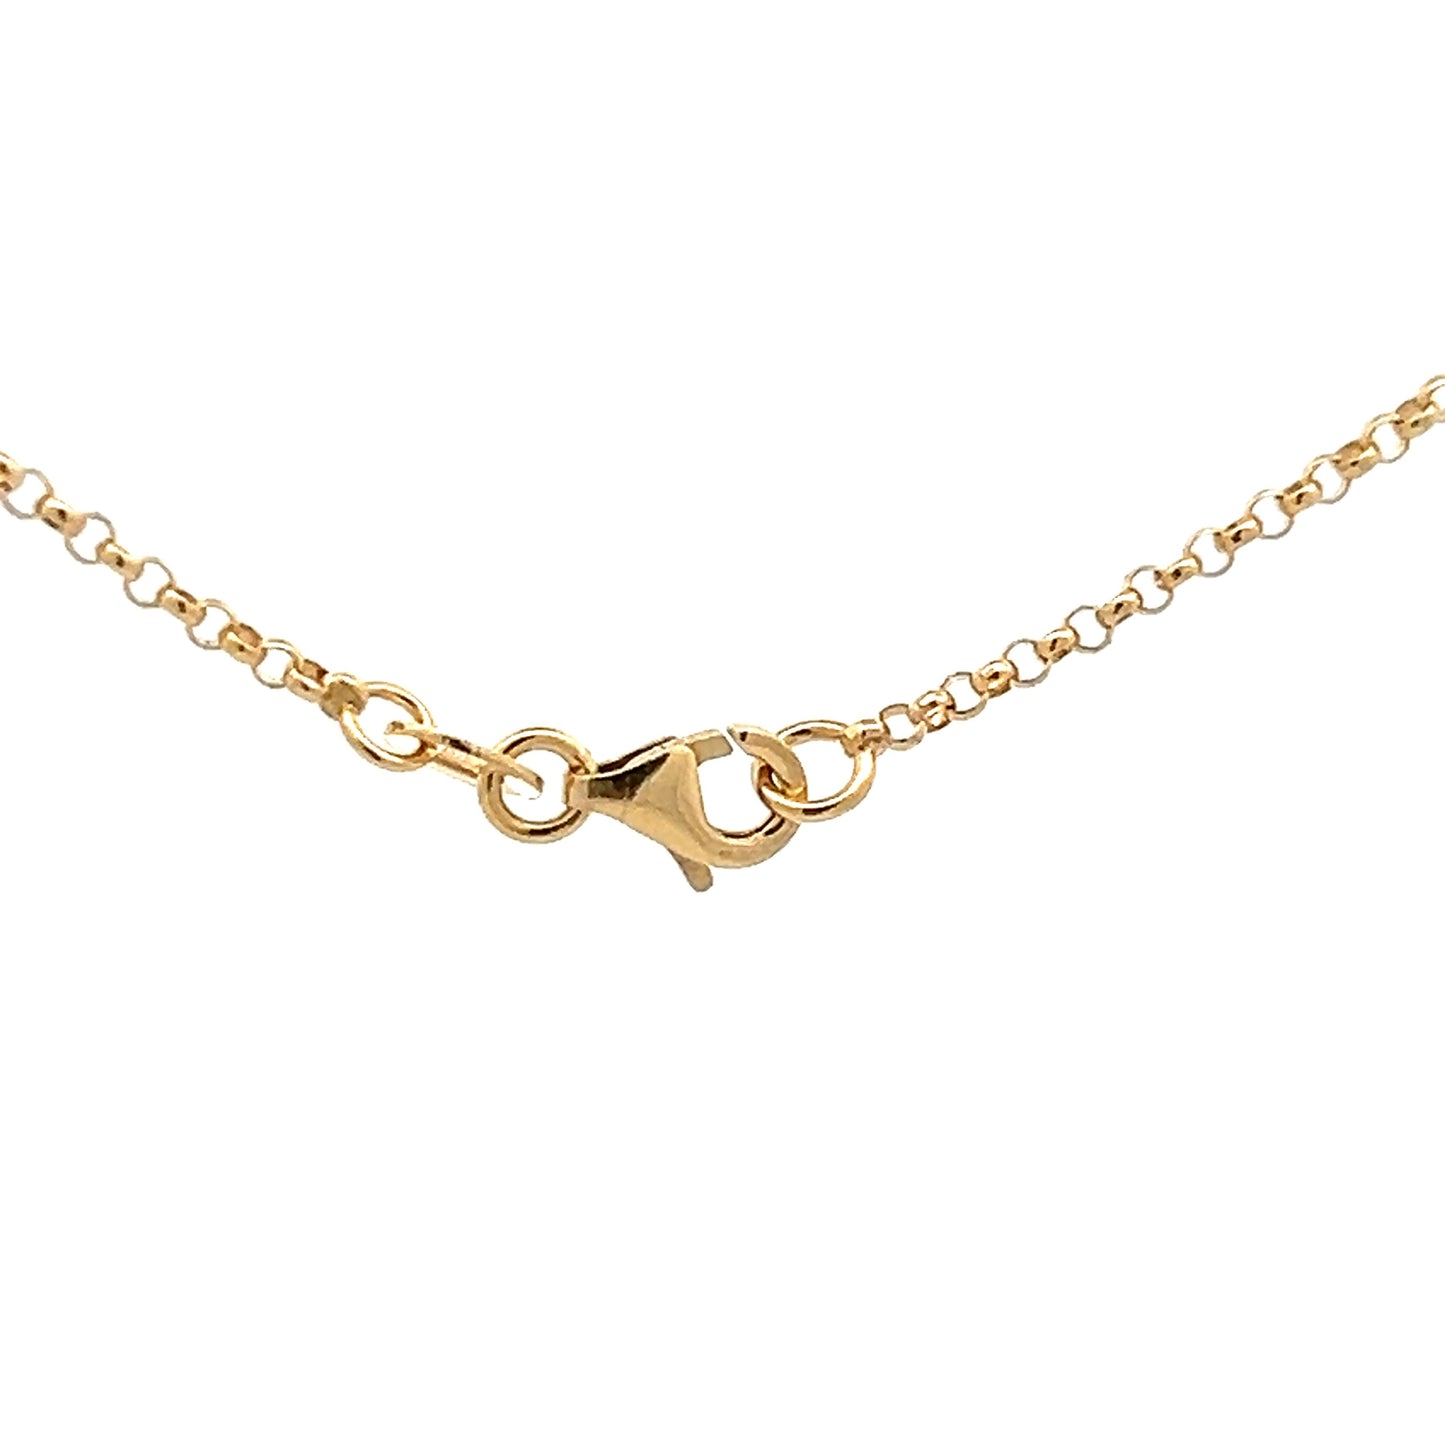 Loop Pendant Necklace in 14k Yellow Gold